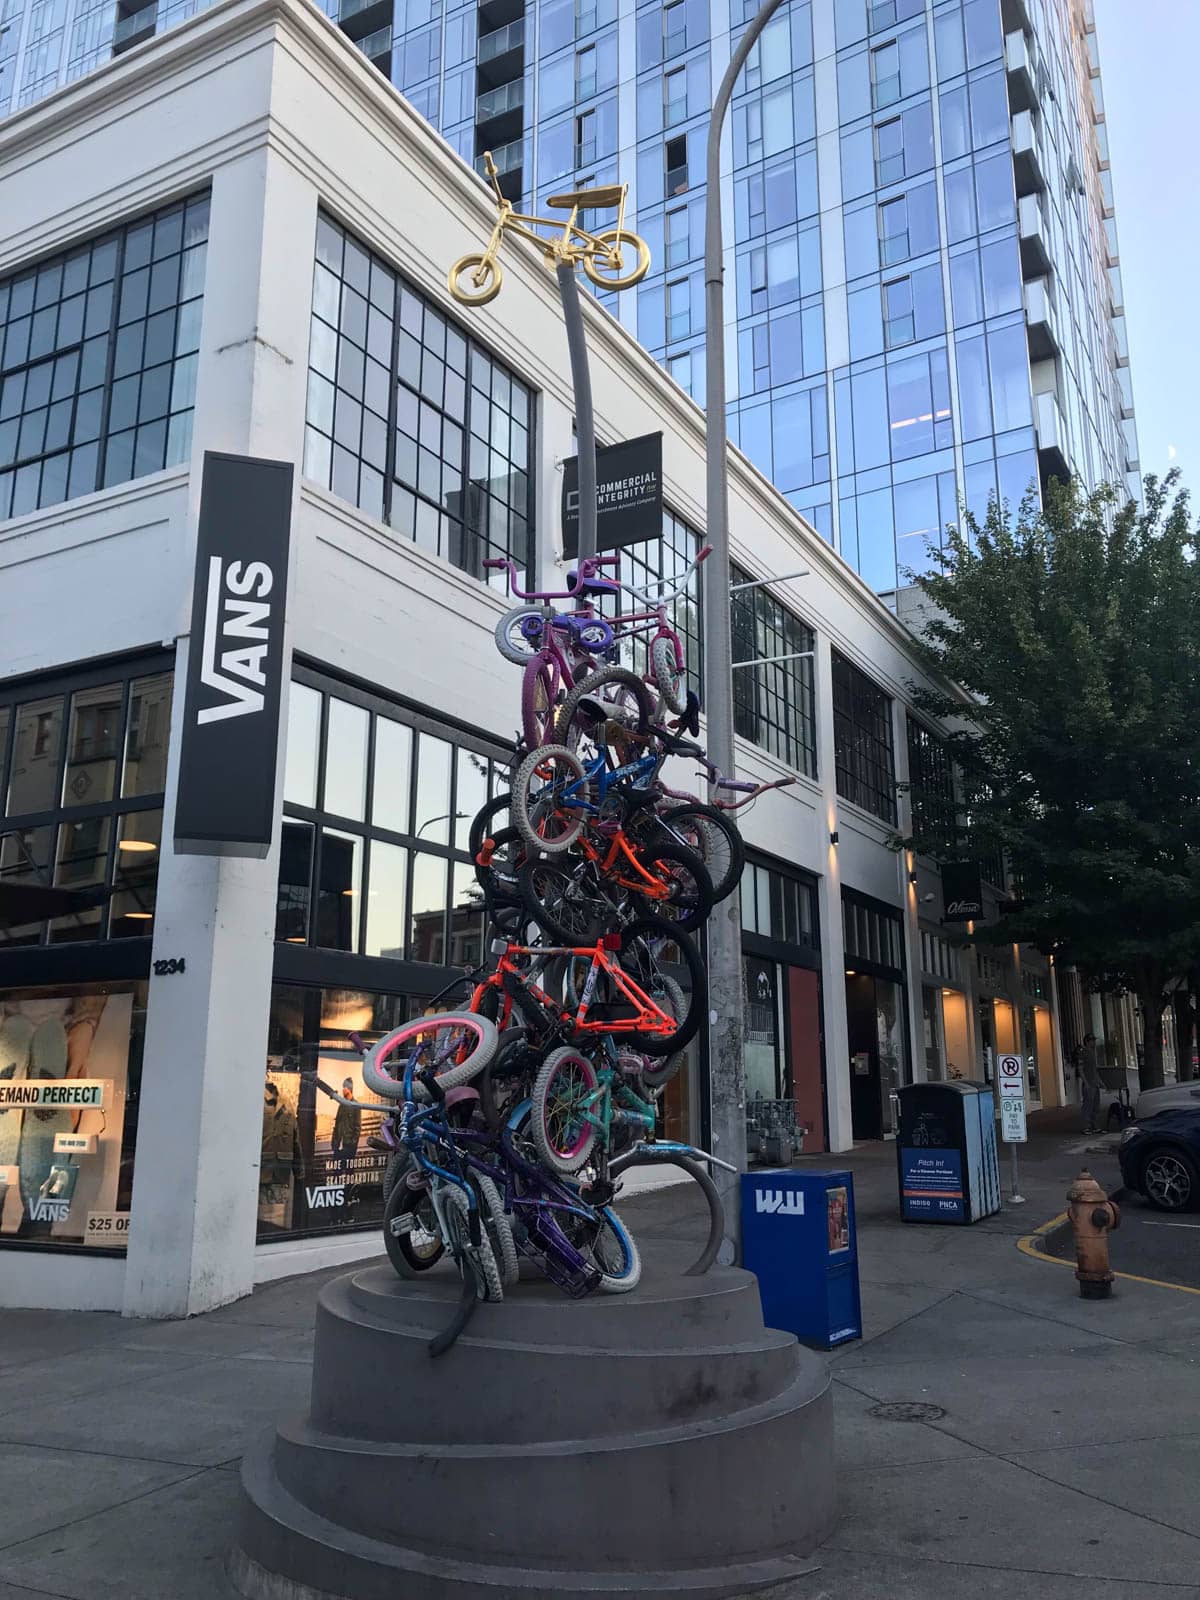 A tall structure of many small colourful bicycles atop each other, standing as a tower with a small golden bicycle on top. The structure is in the middle of a city street with some shopfronts.